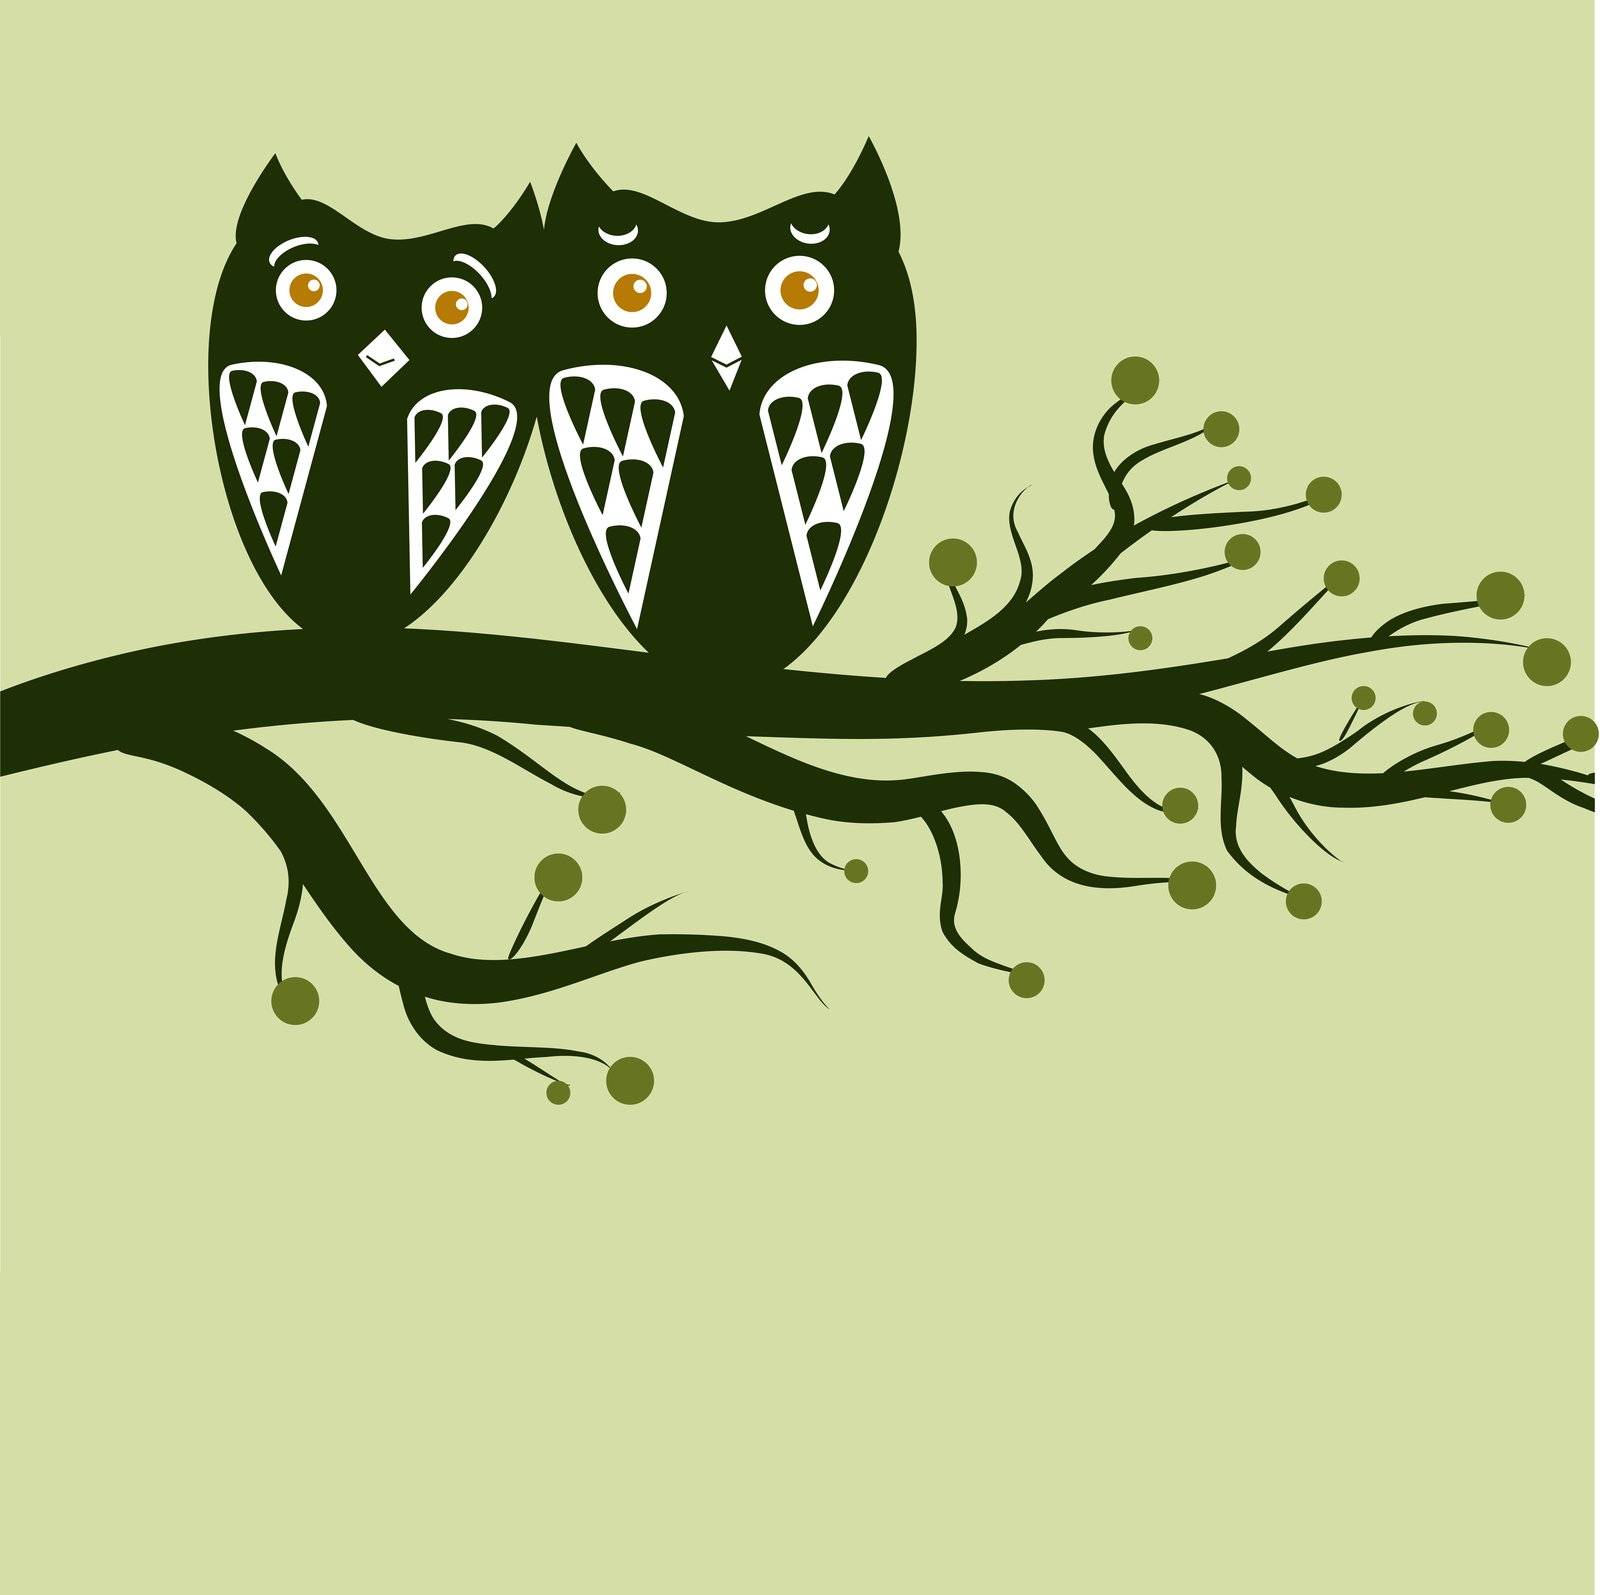 Two cute owls on the tree branch greetings card.